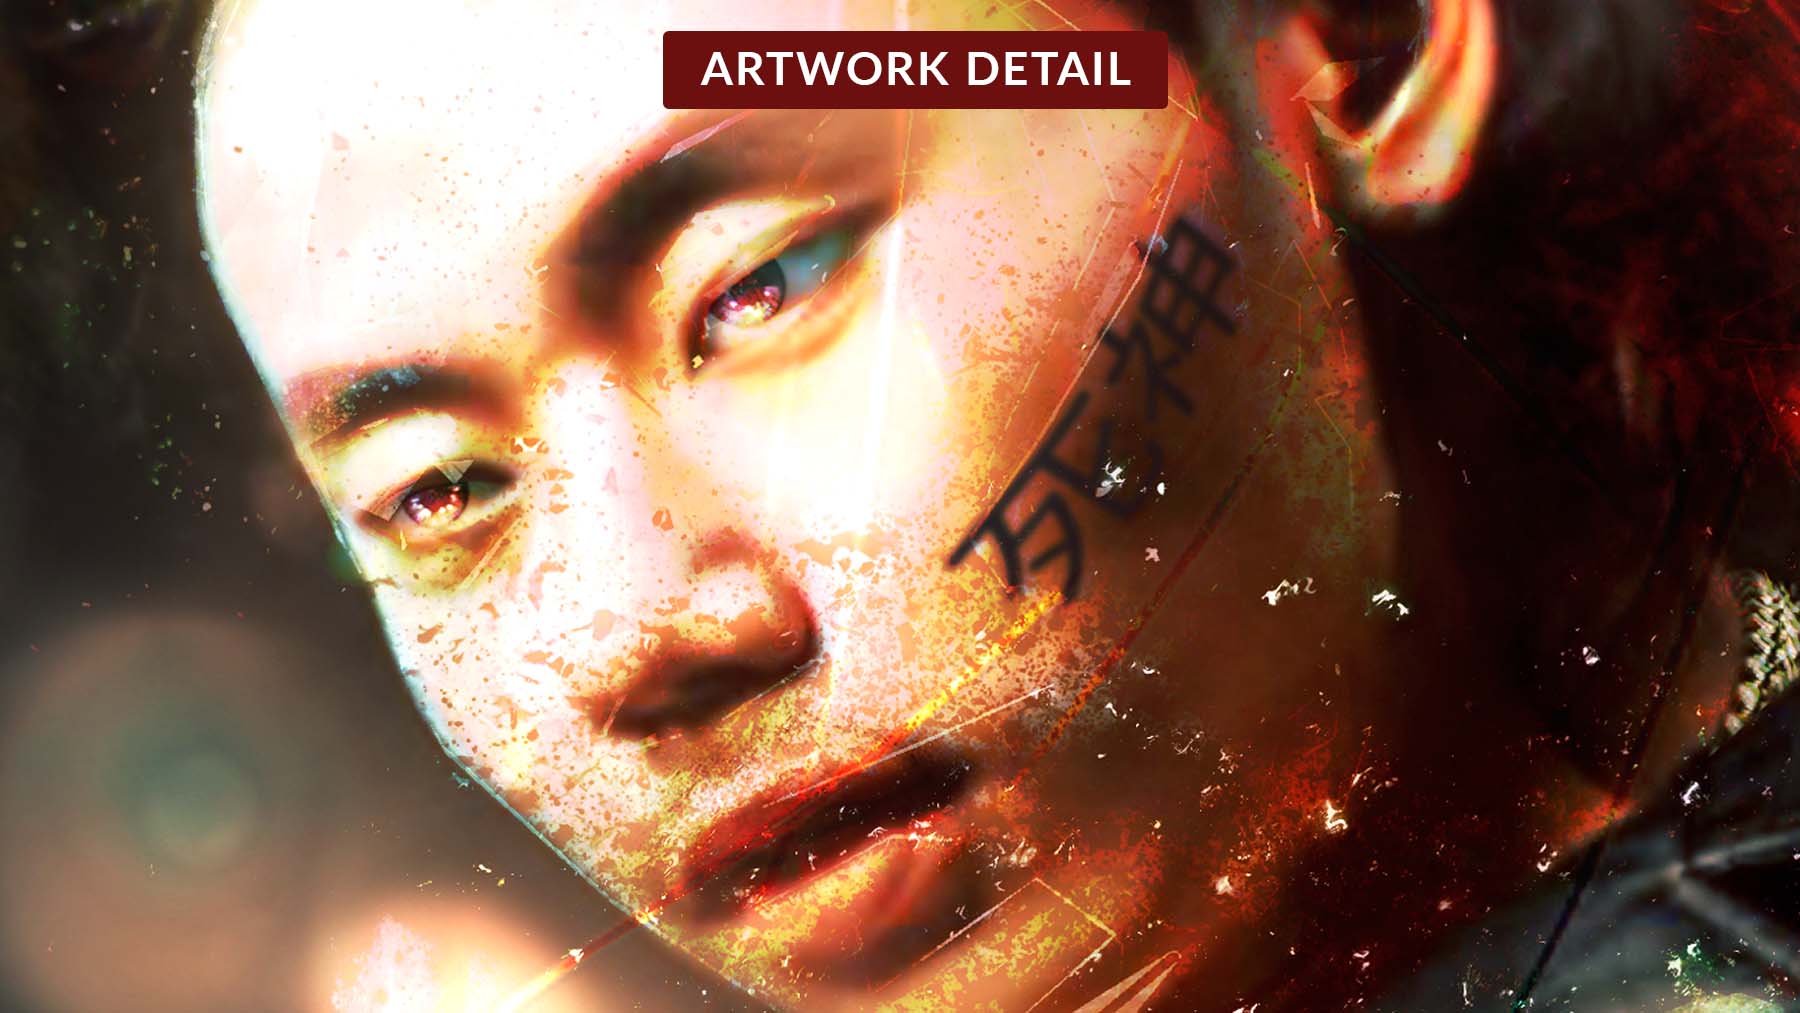 Detailed close-up of Ling's face reveals a facial tattoo and mysterious aura in his glowing eyes from the Lee 'The Lyncher' Ling NFT artwork